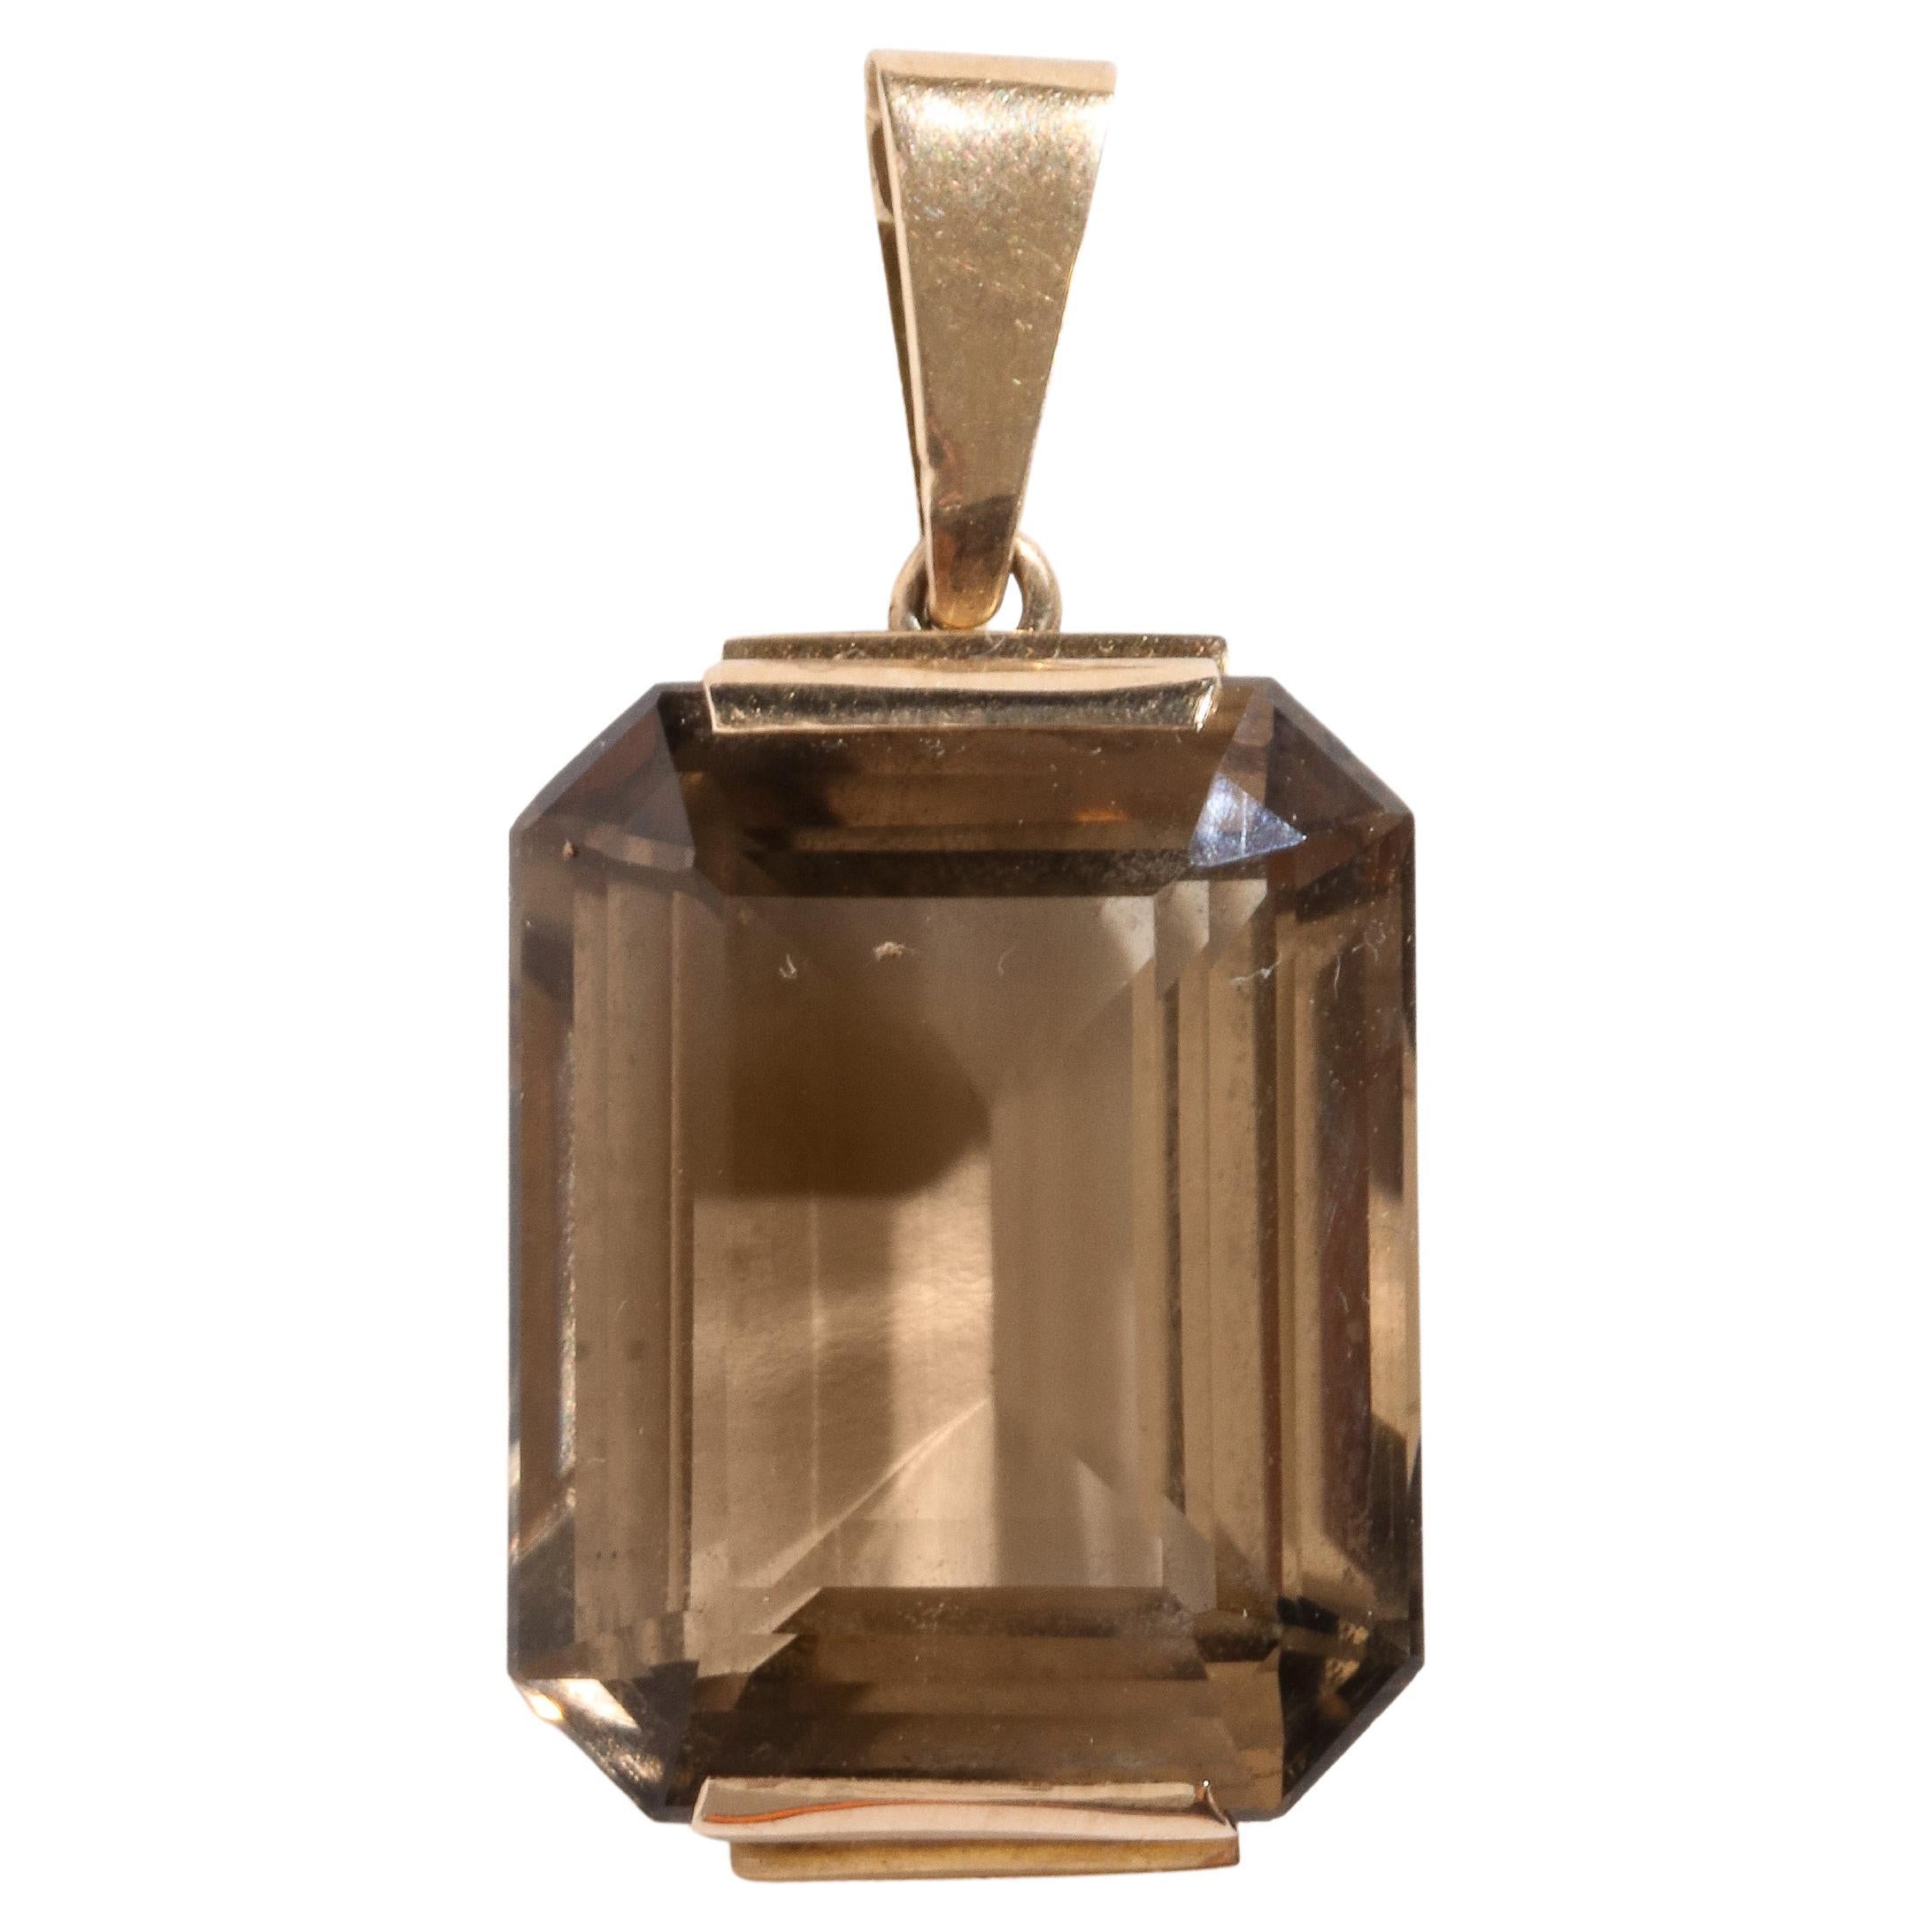 Vintage midcentury French large emerald-cut smoky quartz pendant with 18K gold bail and surround, circa 1950s. No chain. 